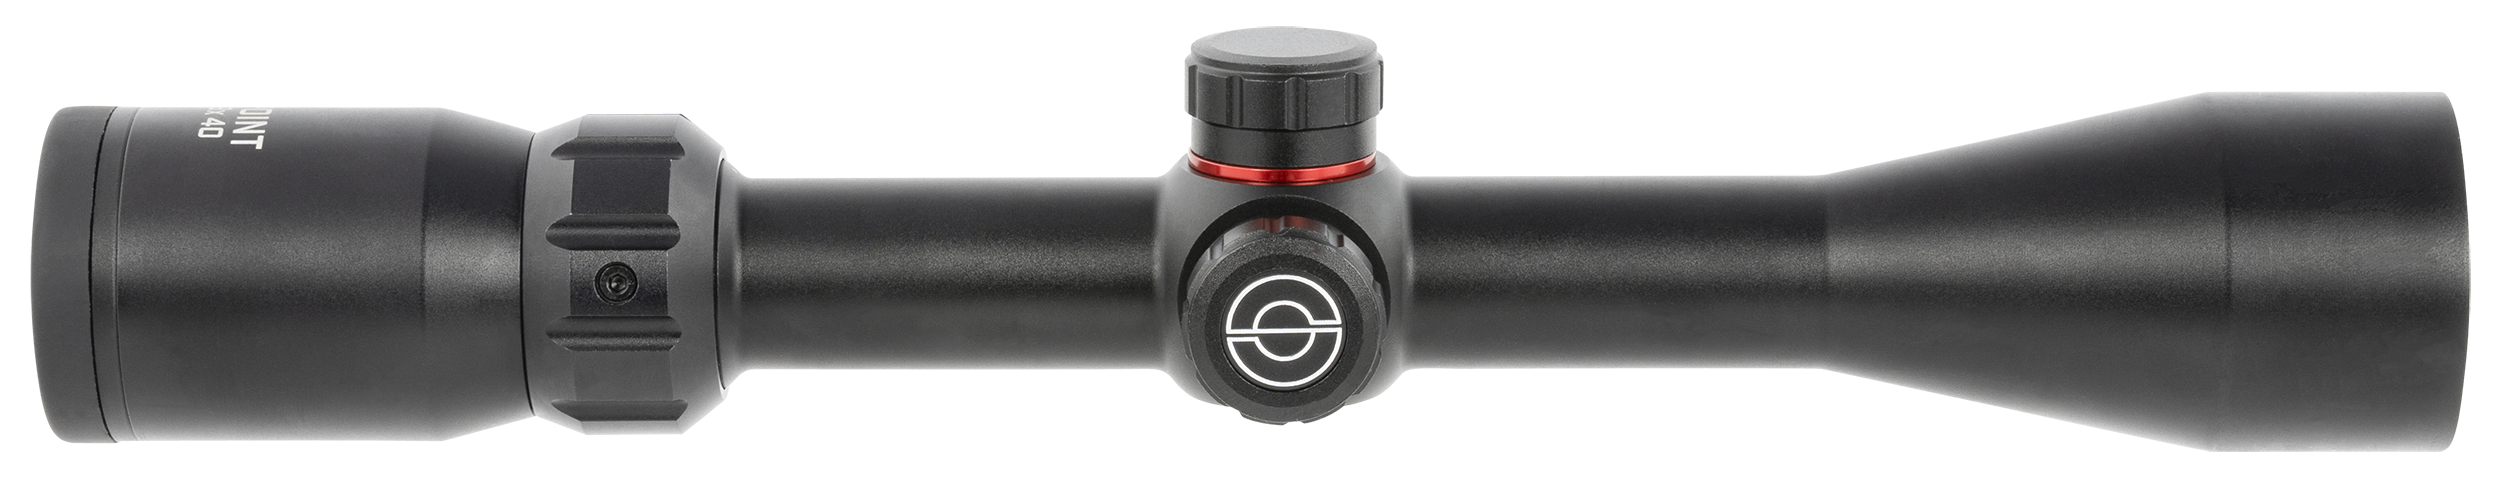 Simmons 8 Point, Simmons S8p3940  3-9x40  8 Point Black Riflescope